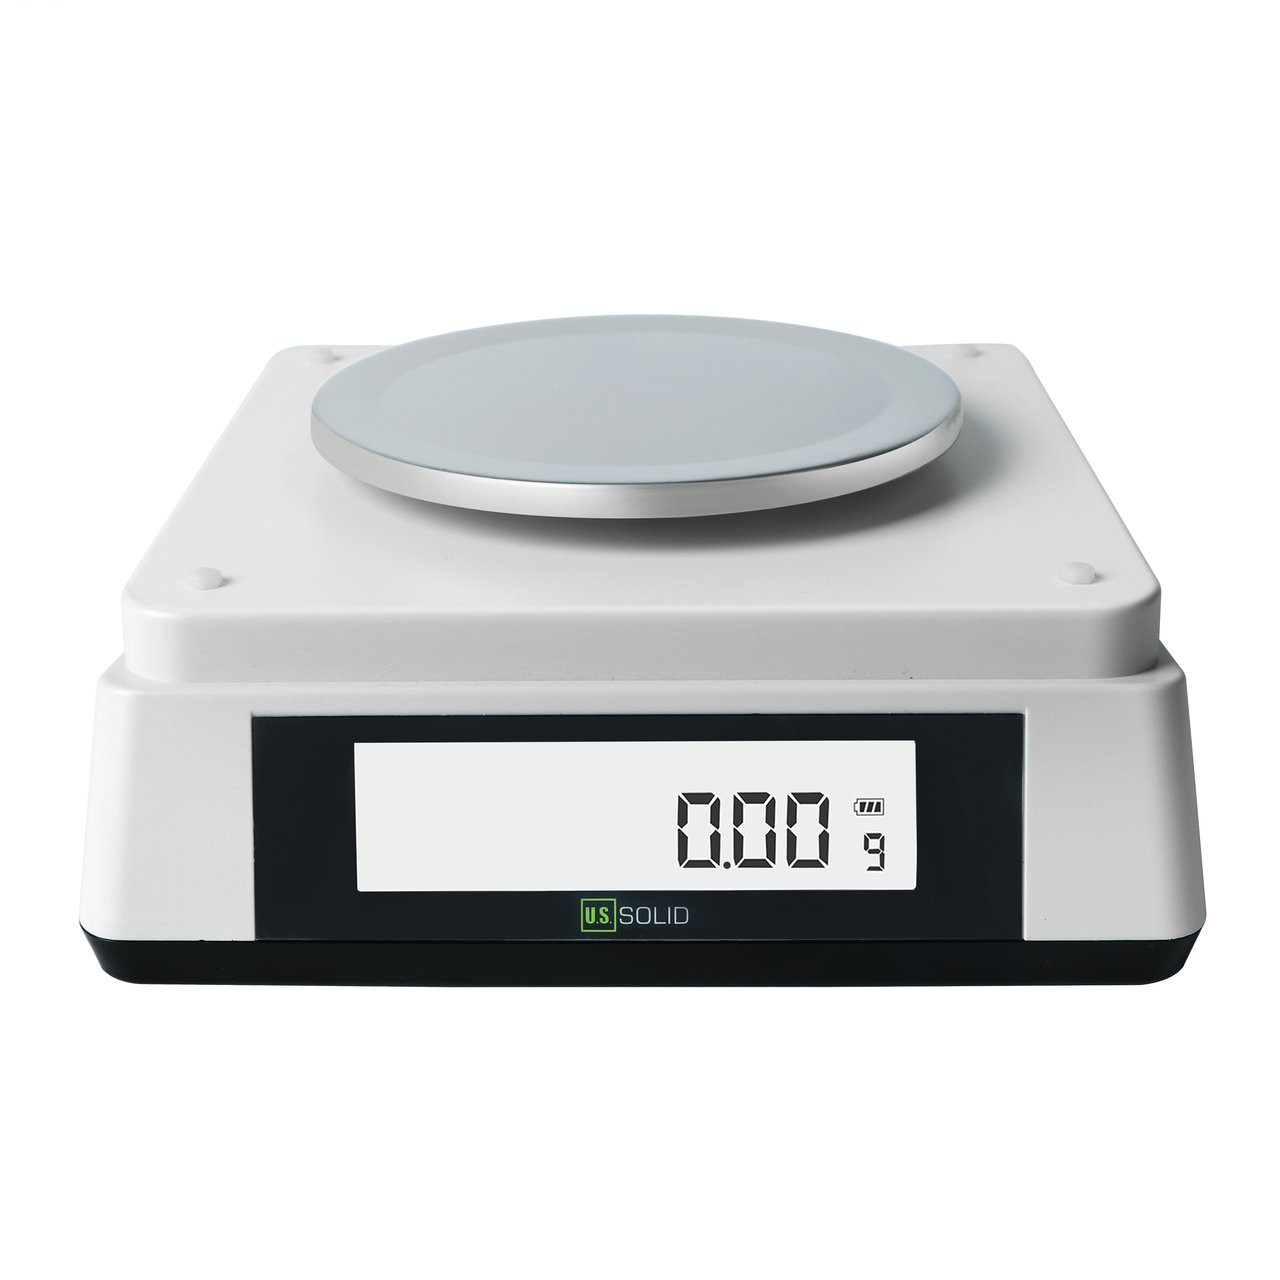 U.S. Solid 3kg x 0.01g Precision Balance – 2 LED Sceens 10mg Digital Analytical Lab Electronic Scale, 3100 G x 0.01g